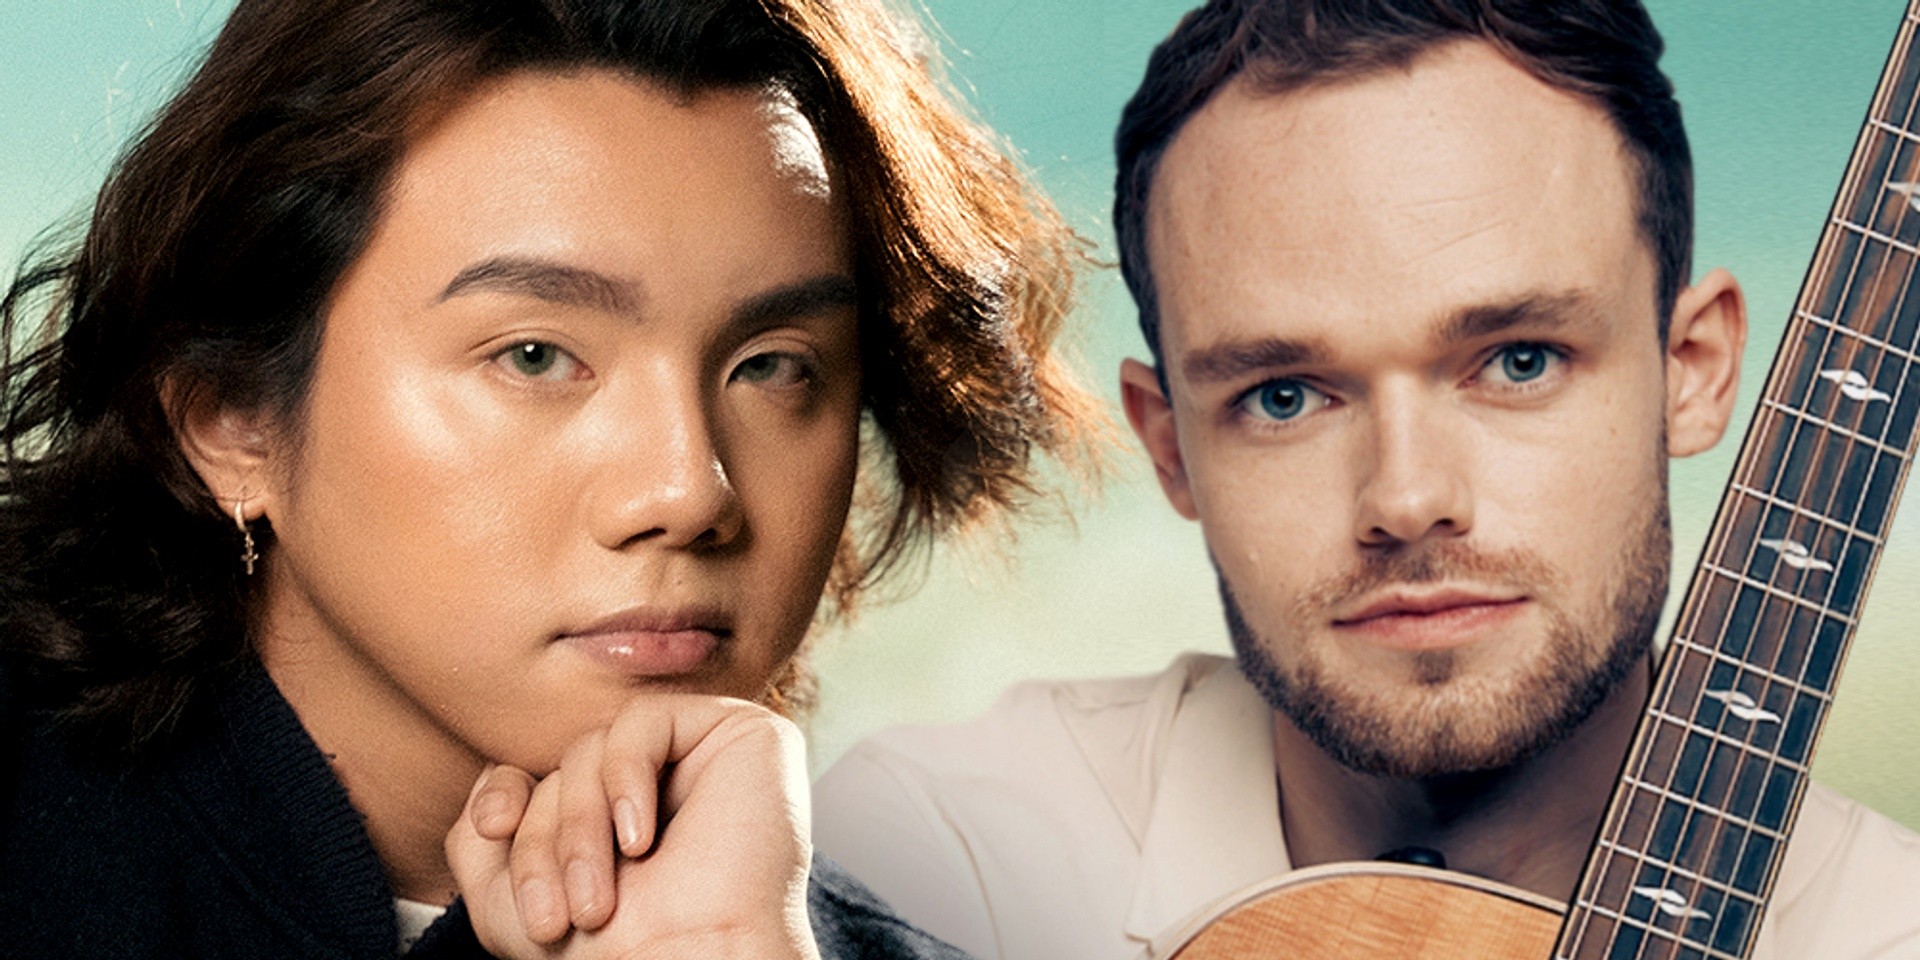 Zack Tabudlo teams up with James TW for 'Binibini (Last Day on Earth)' – listen